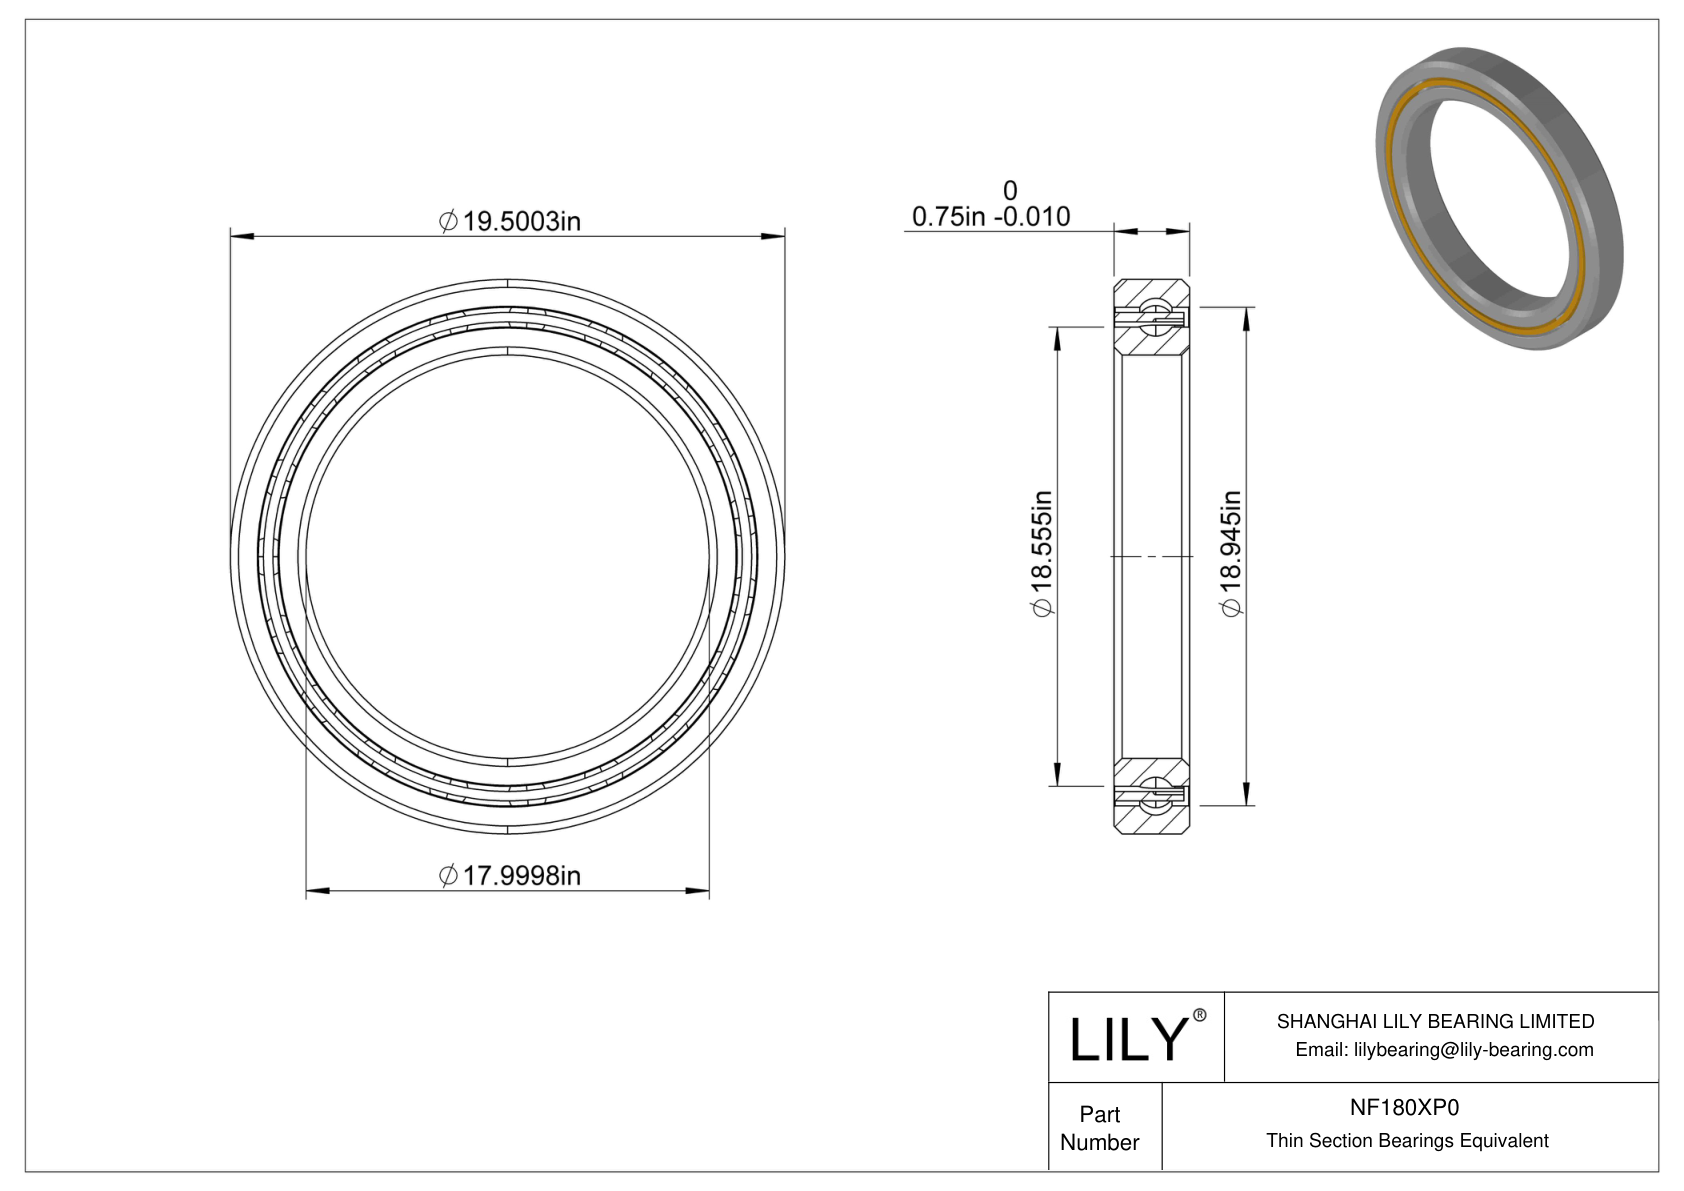 NF180XP0 Constant Section (CS) Bearings cad drawing